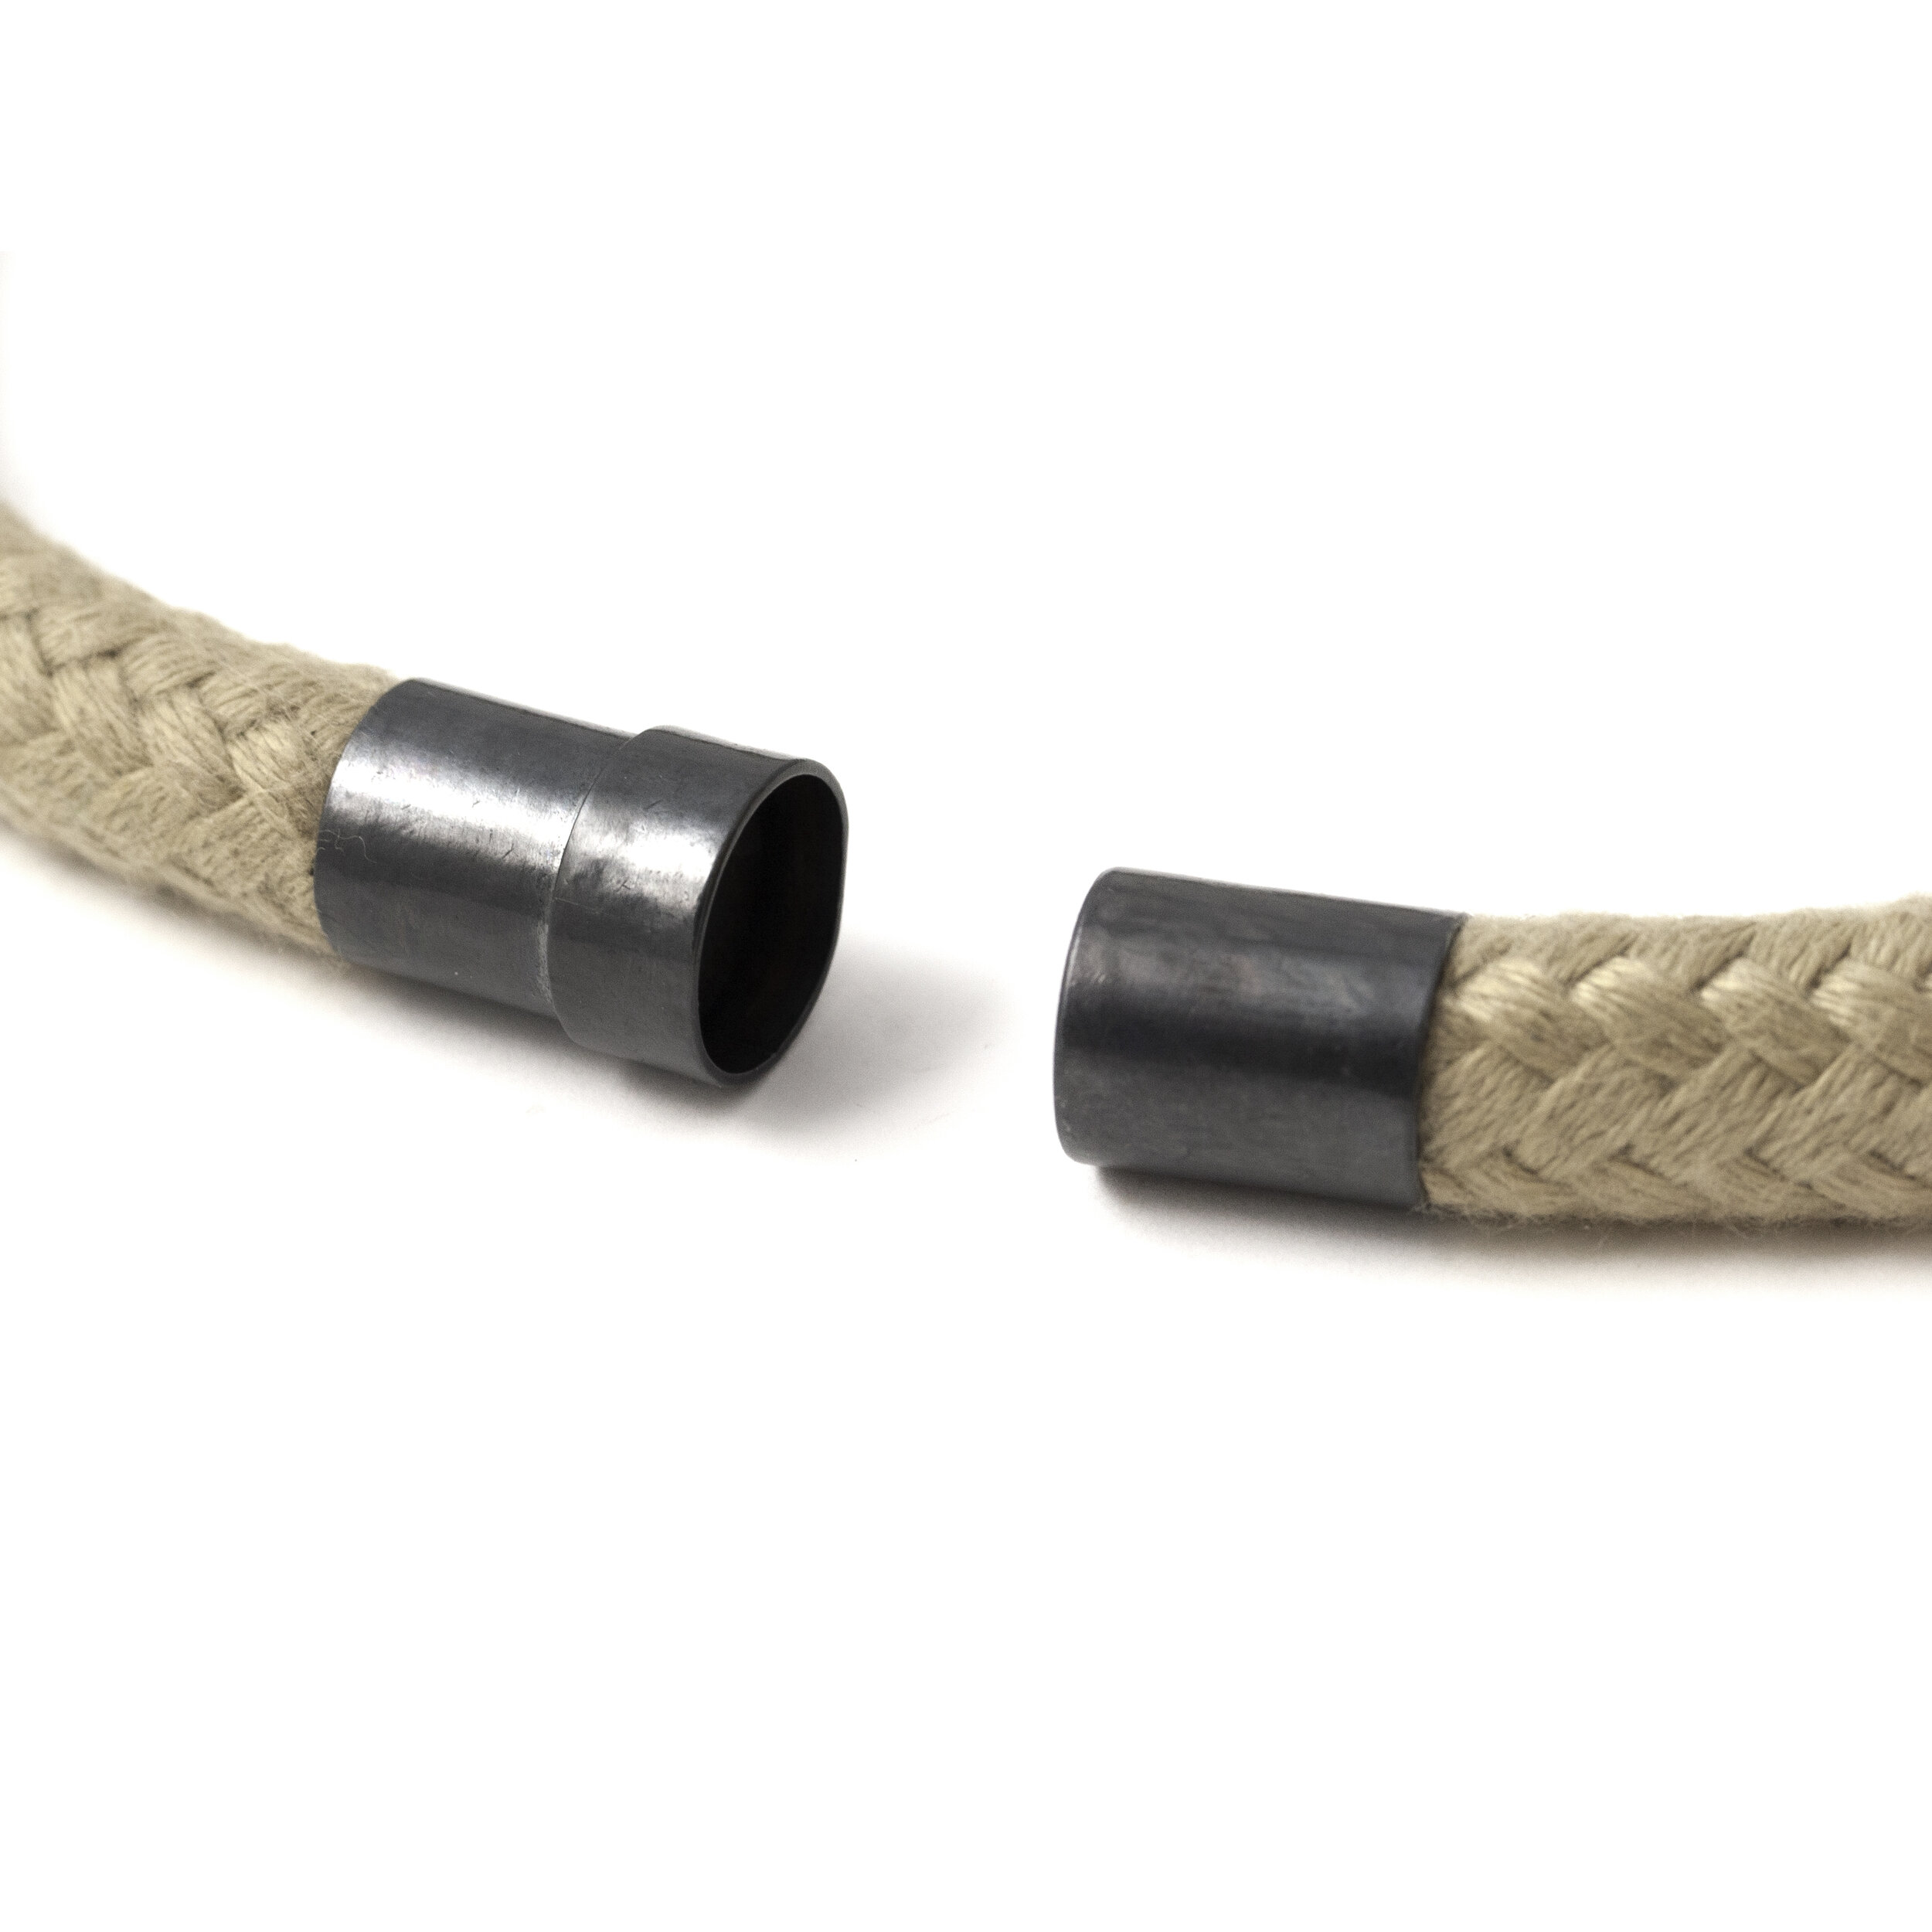 natural rope clasp open.jpg